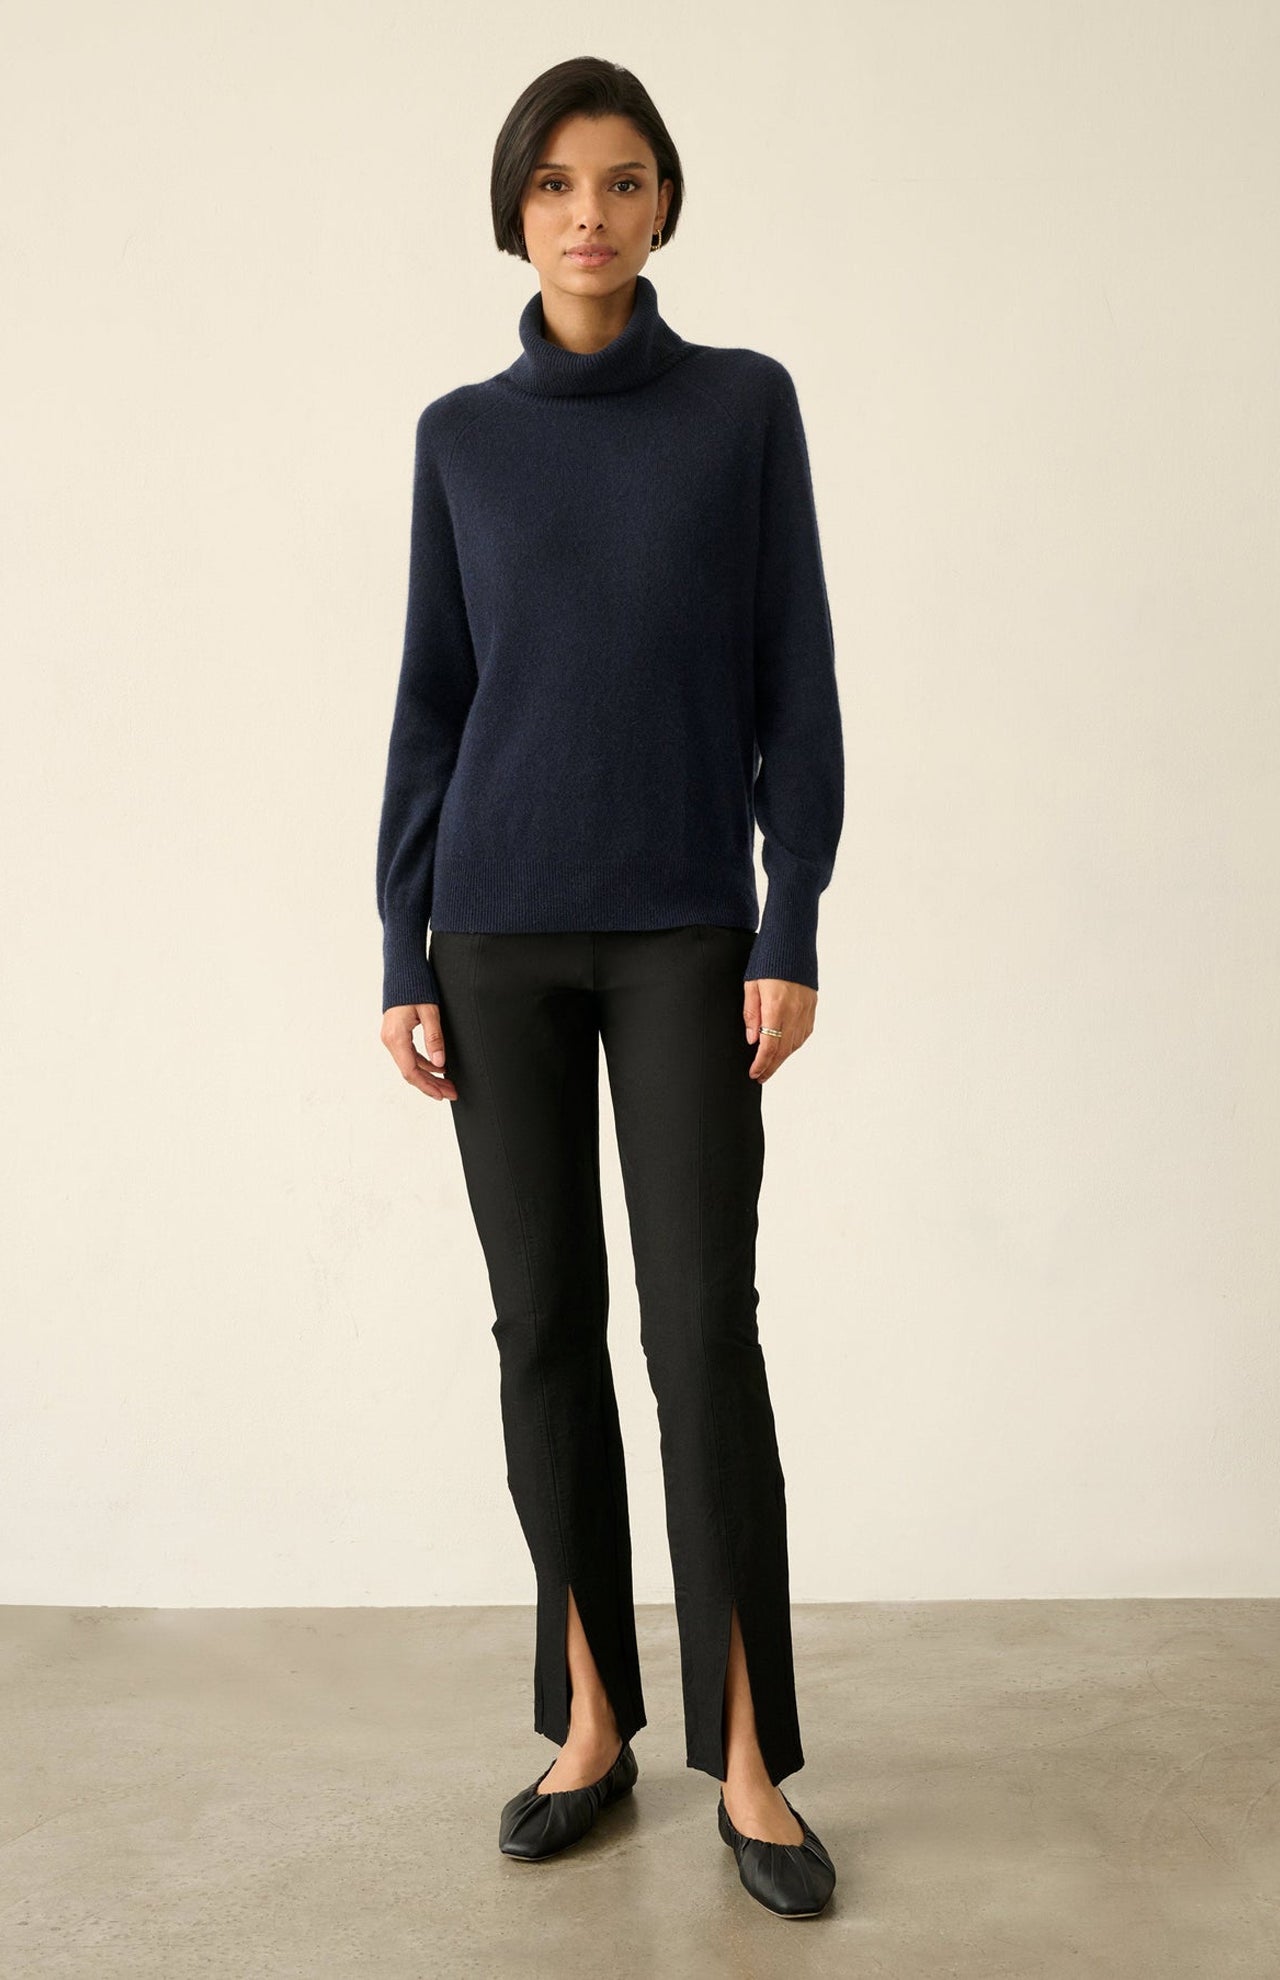 White And Warren Cashmere Essential Turtleneck Sweater Deep Navy Front Full Body Model Image (6977567096947)